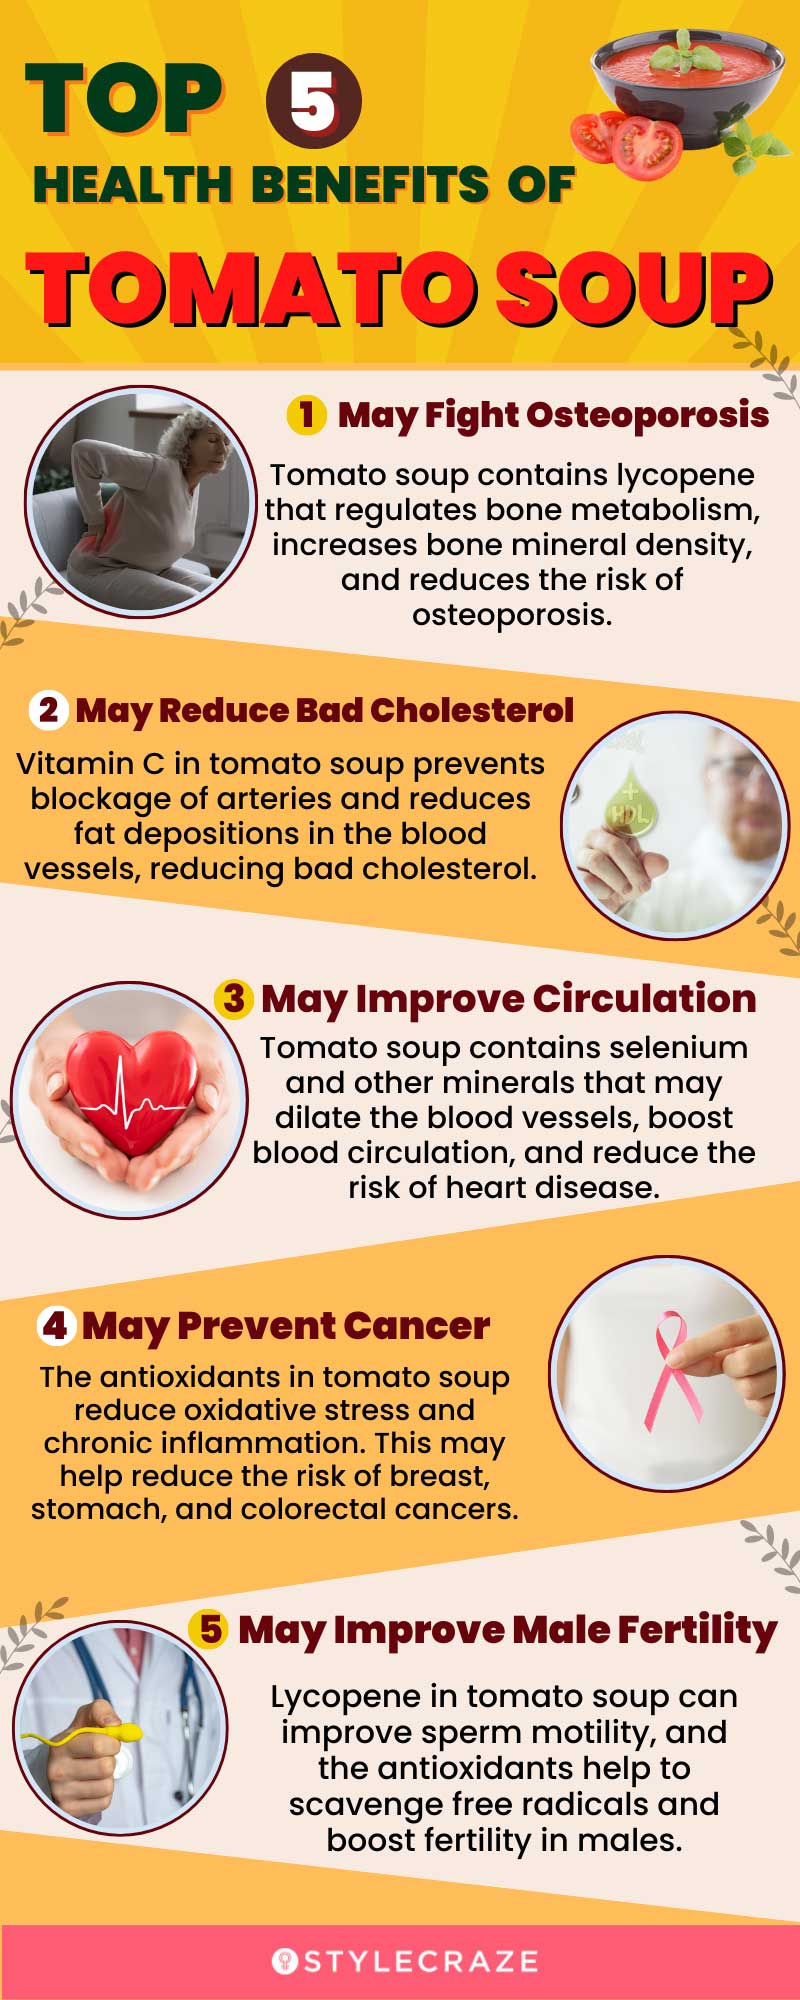 top 5 health benefits of tomato soup (infographic)